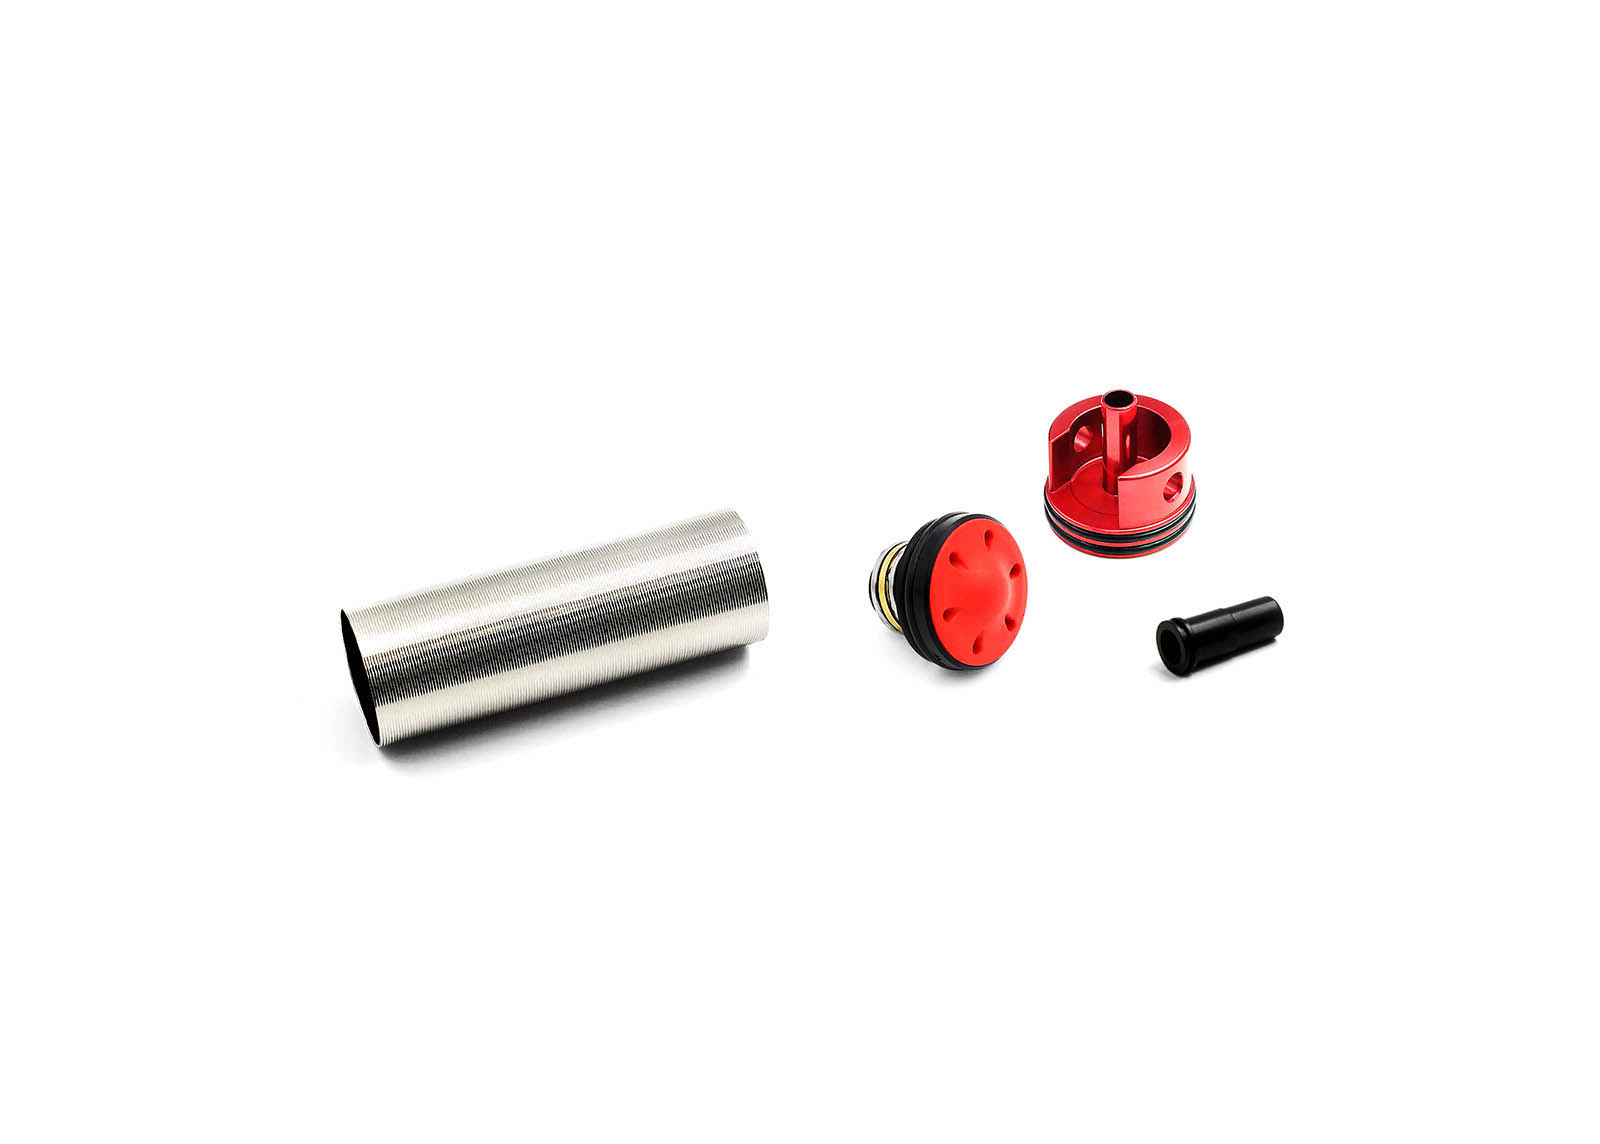 Bore-Up Cylinder Set for M16-A1/VN - Modify AEG Airsoft parts